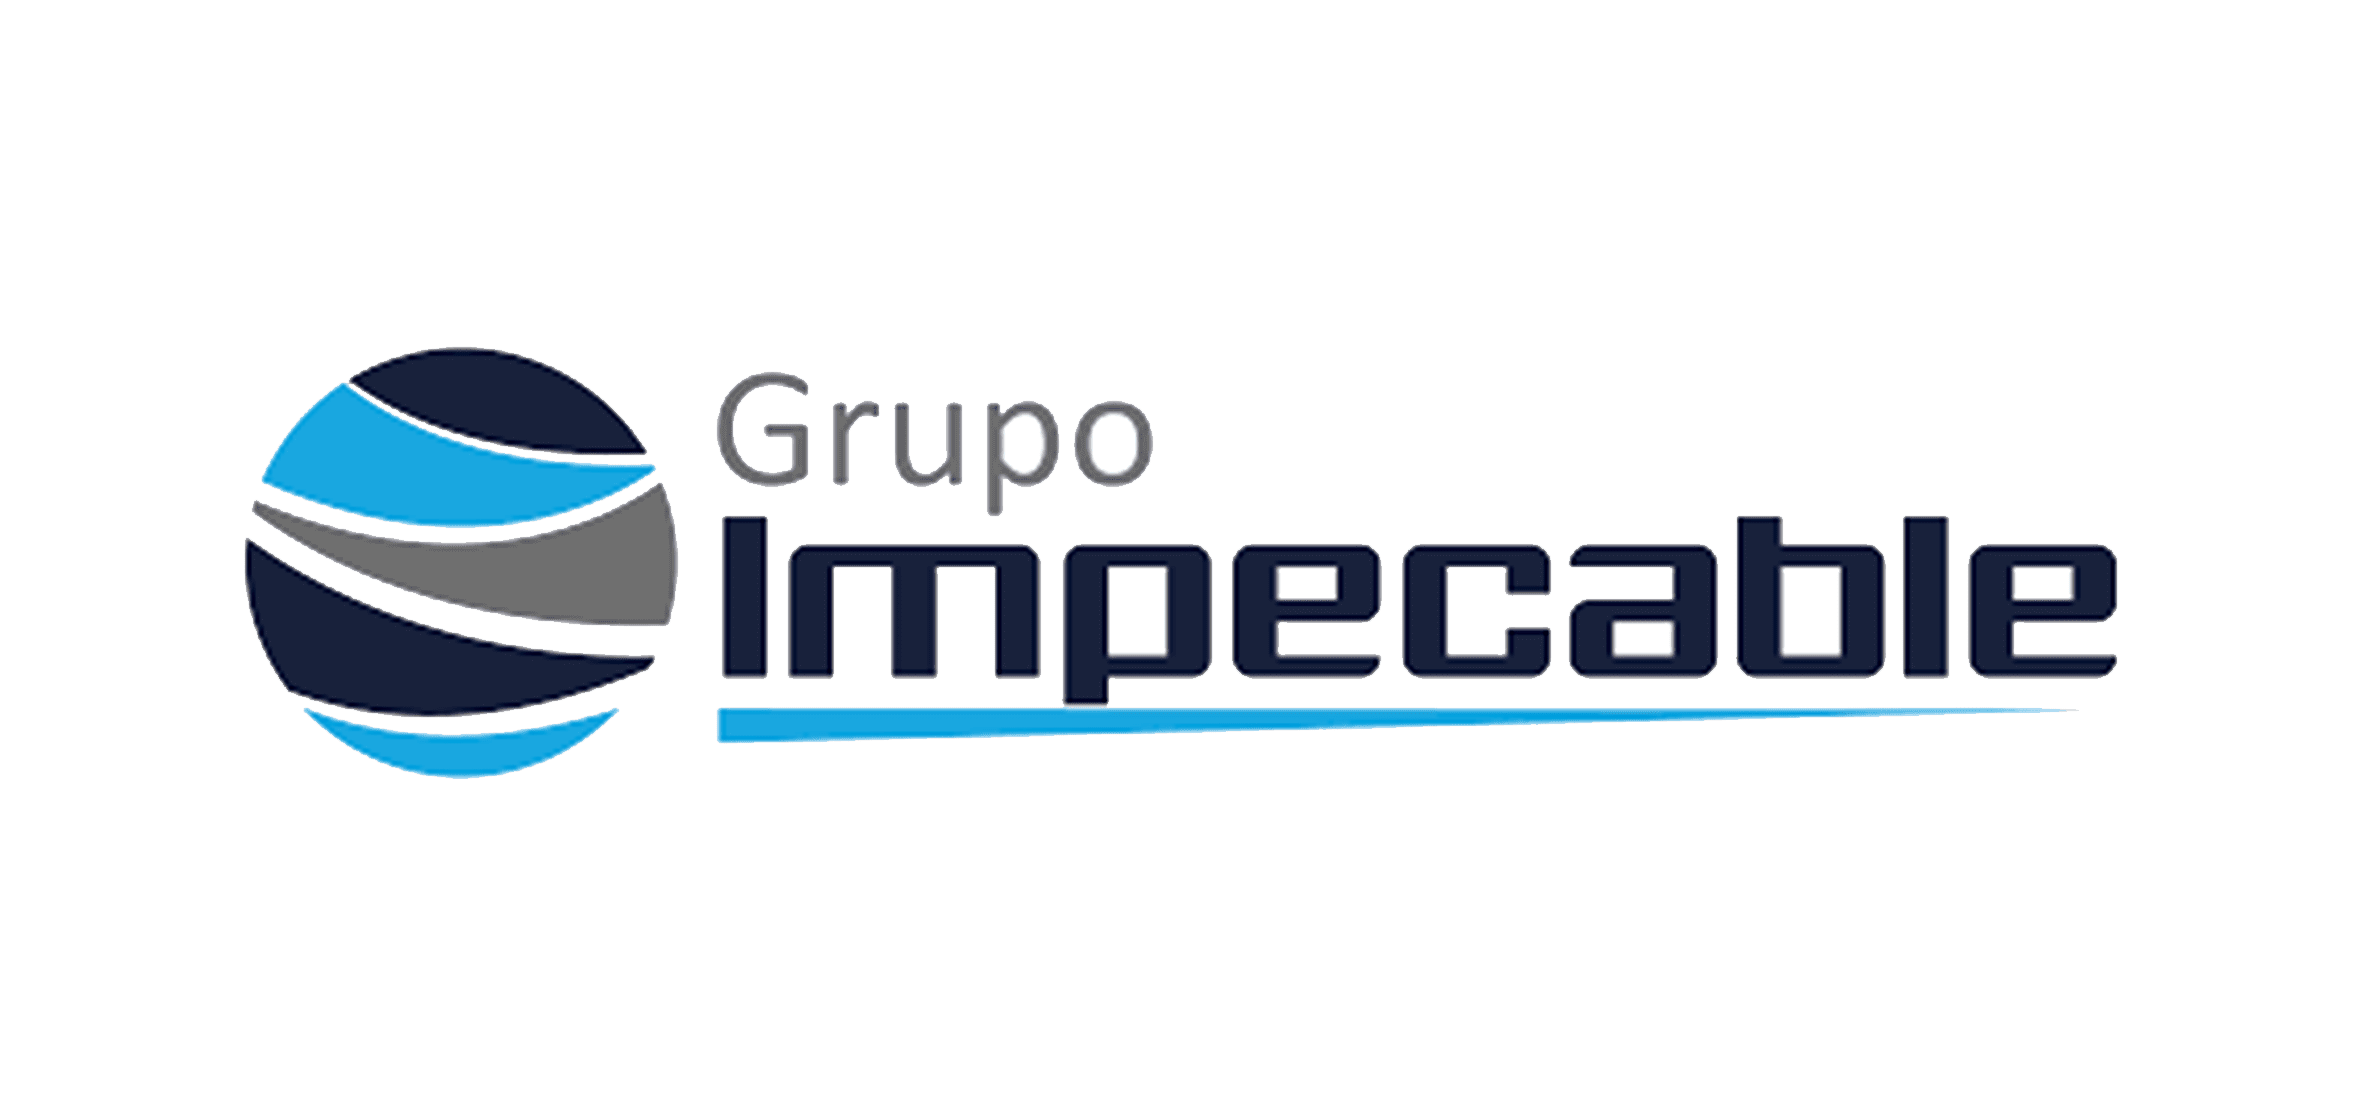 Grupo impecable (1)